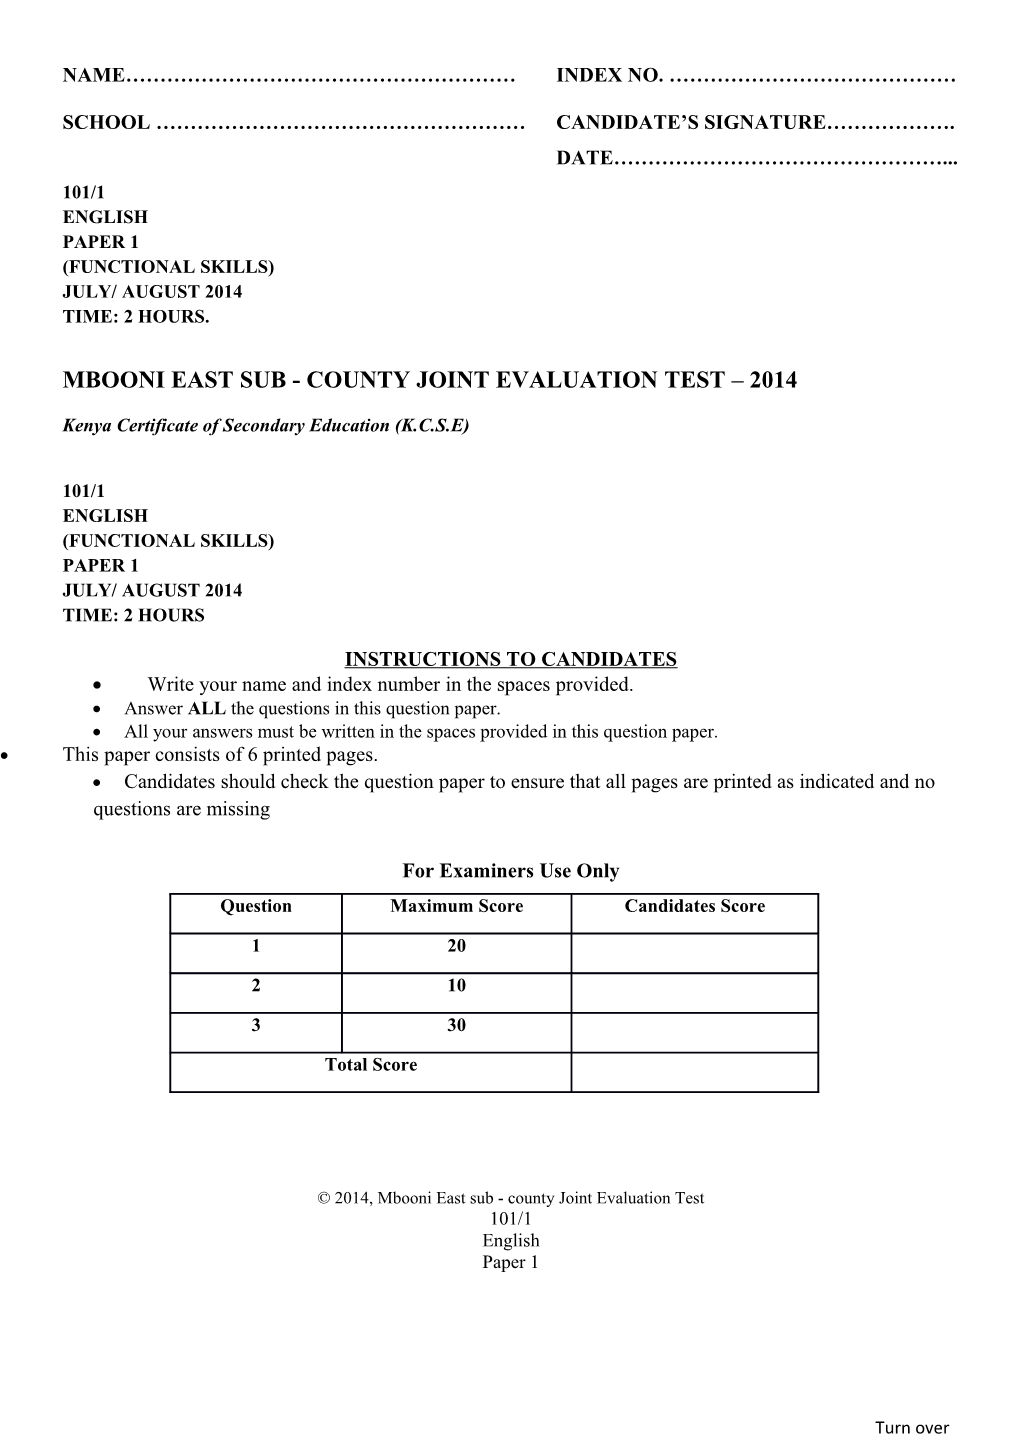 Mbooni East Sub - County Joint Evaluation Test 2014